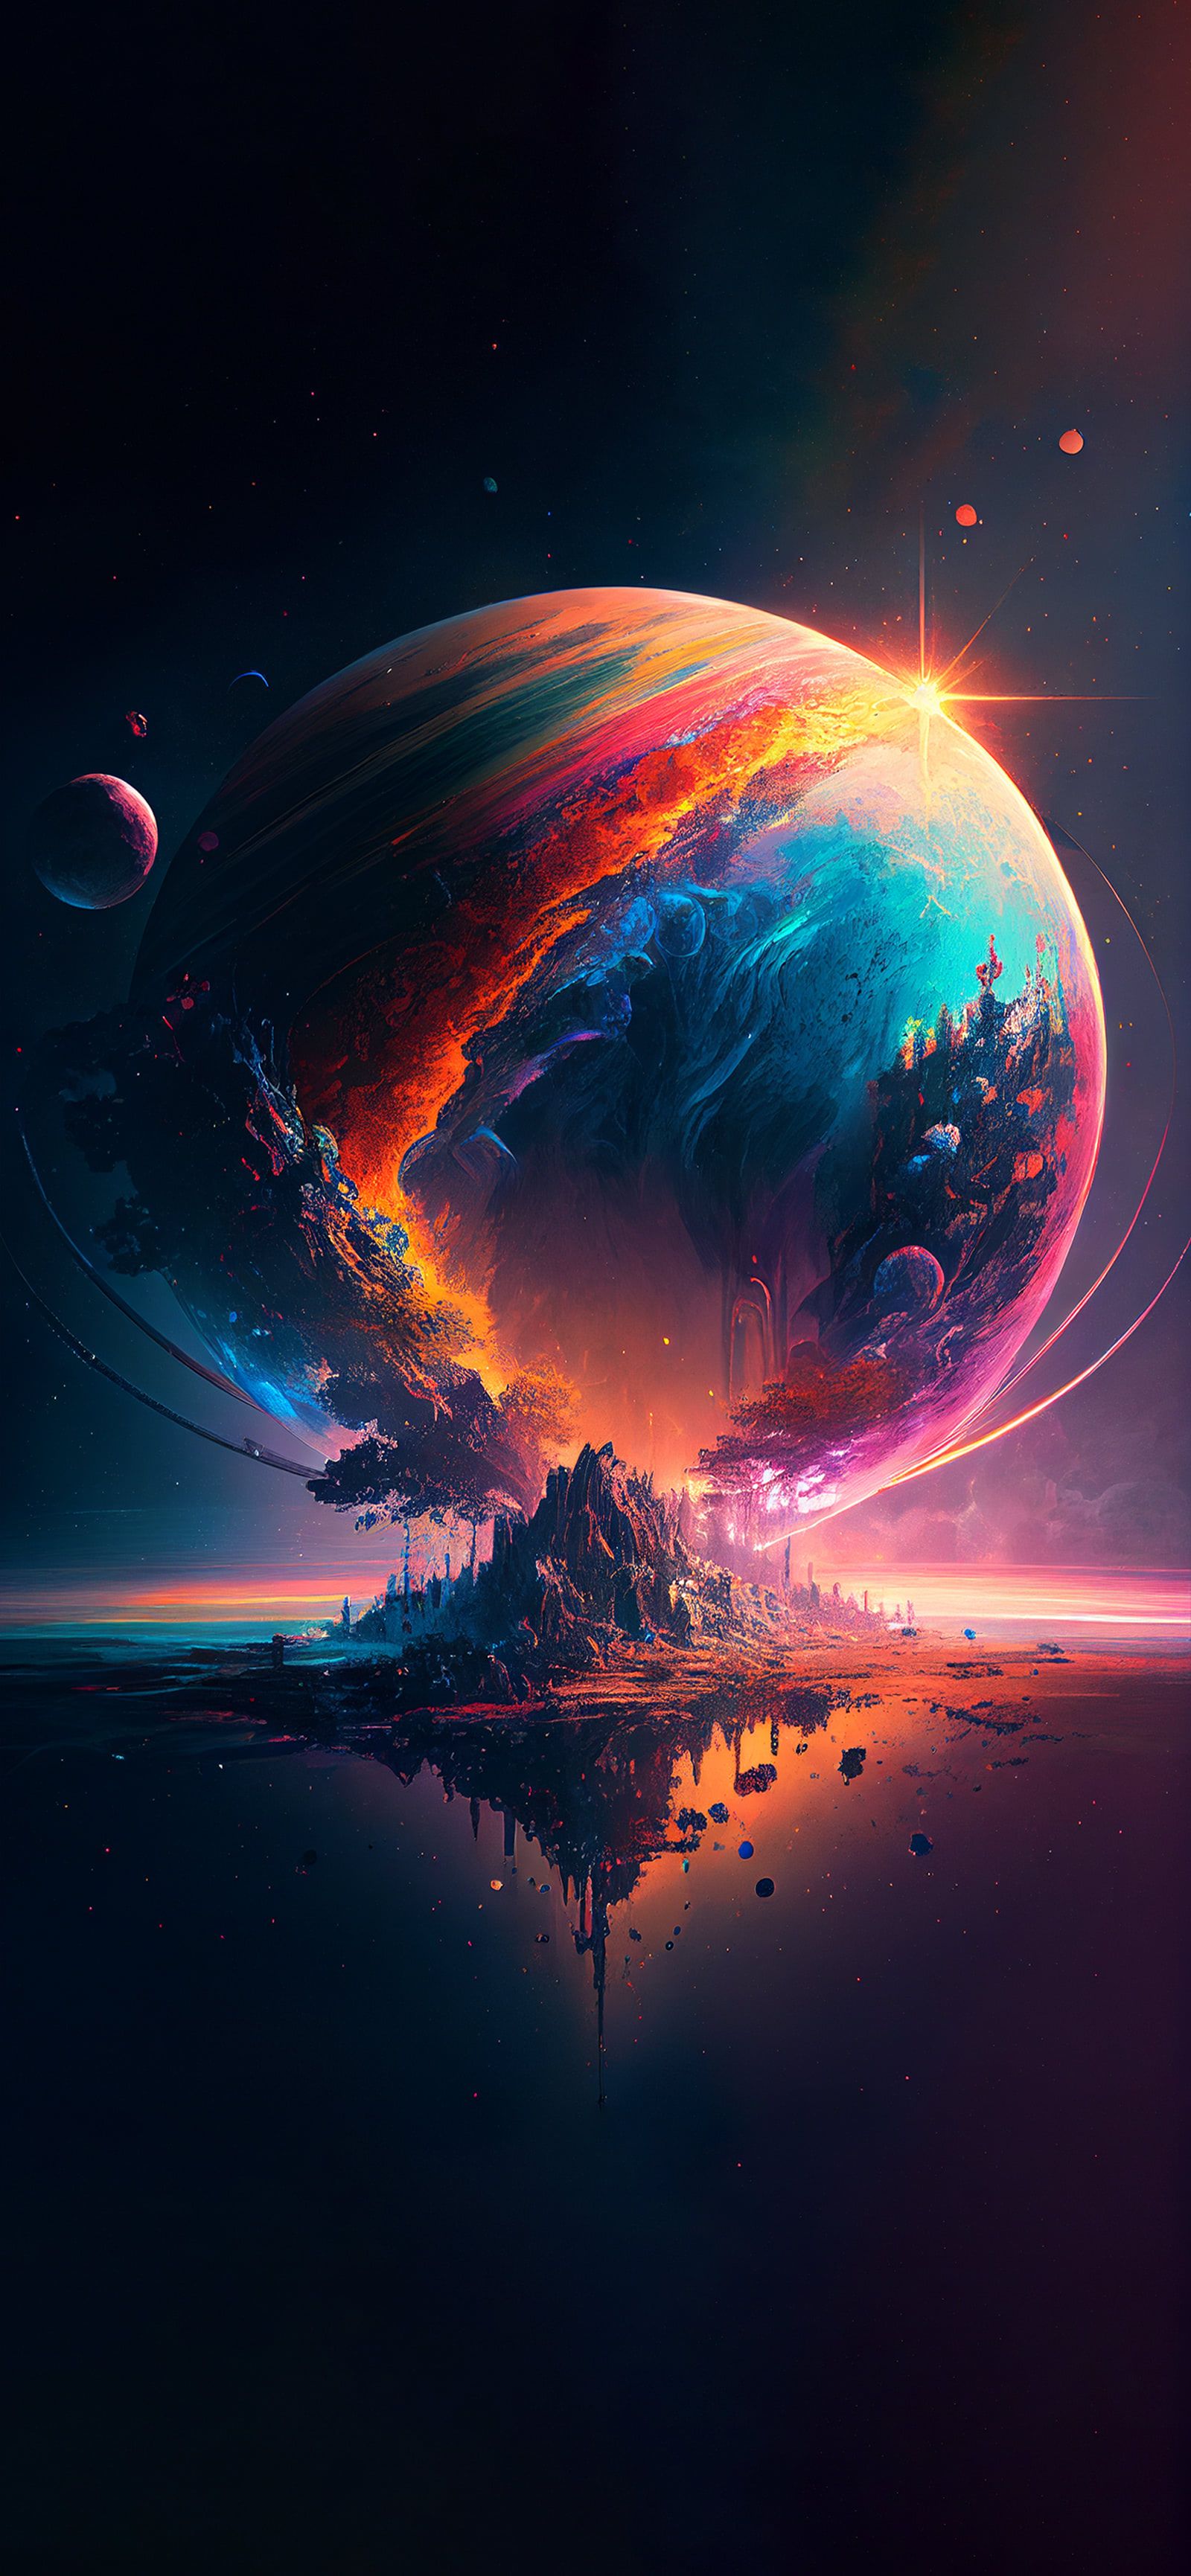 Amoled 4k wallpaper space Colorful and Astonishing planet and mountain| Amoled 4k wallpaper space Colorful and Astonishing planet and mountain reflecting on lake - wallpapers 4K - Wallpaper